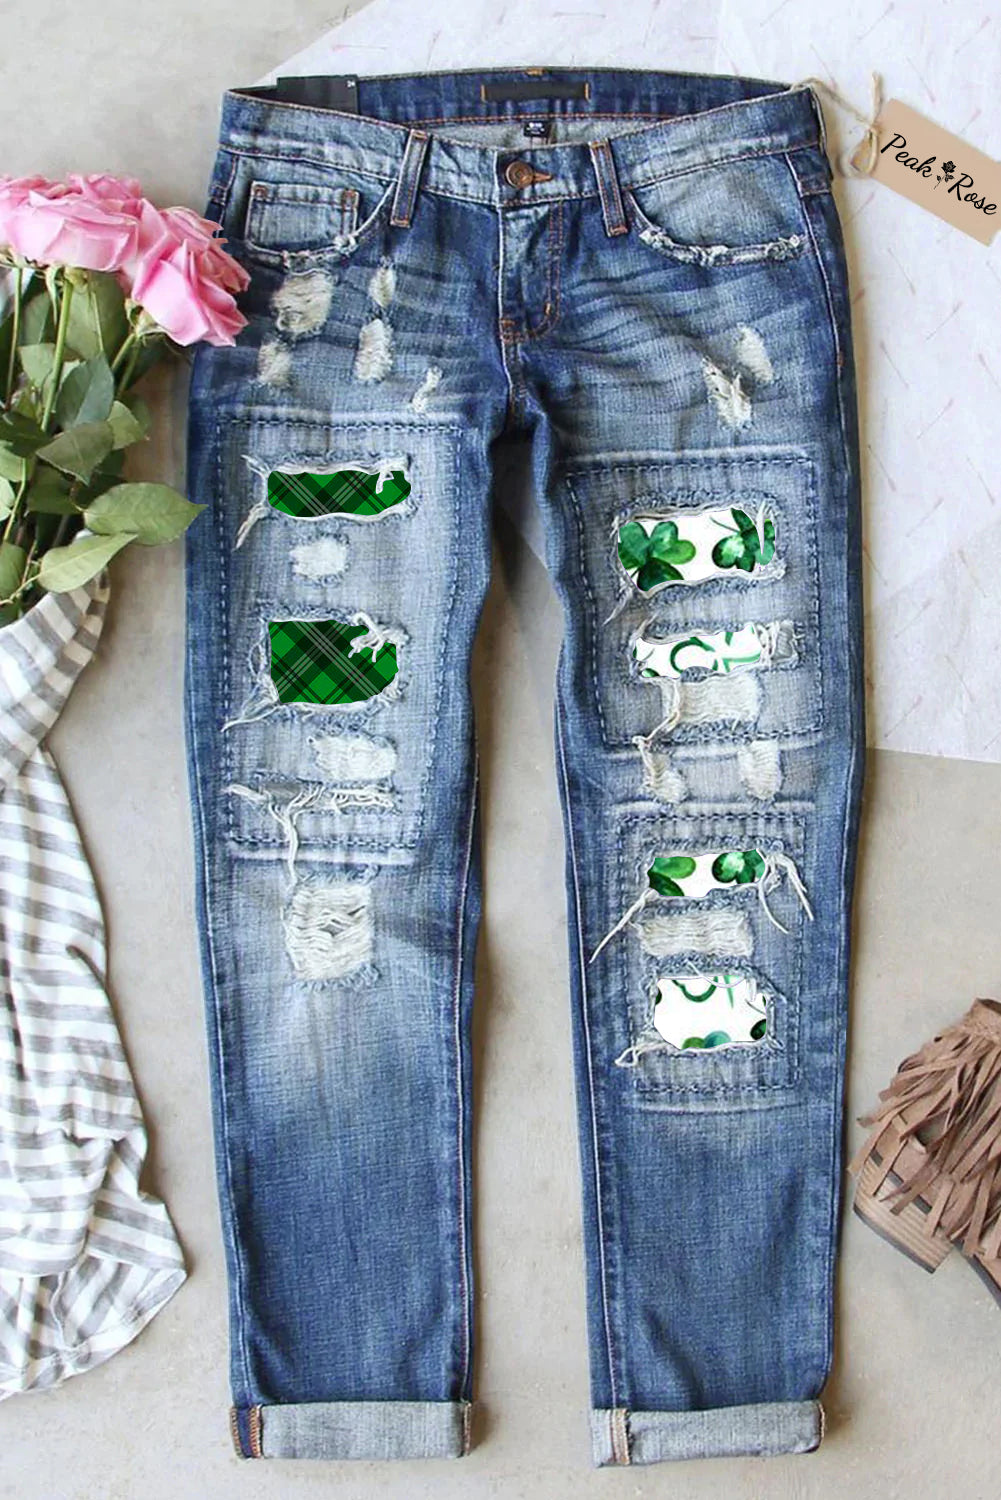 Green Ink Clover Check Print Ripped Denim Jeans